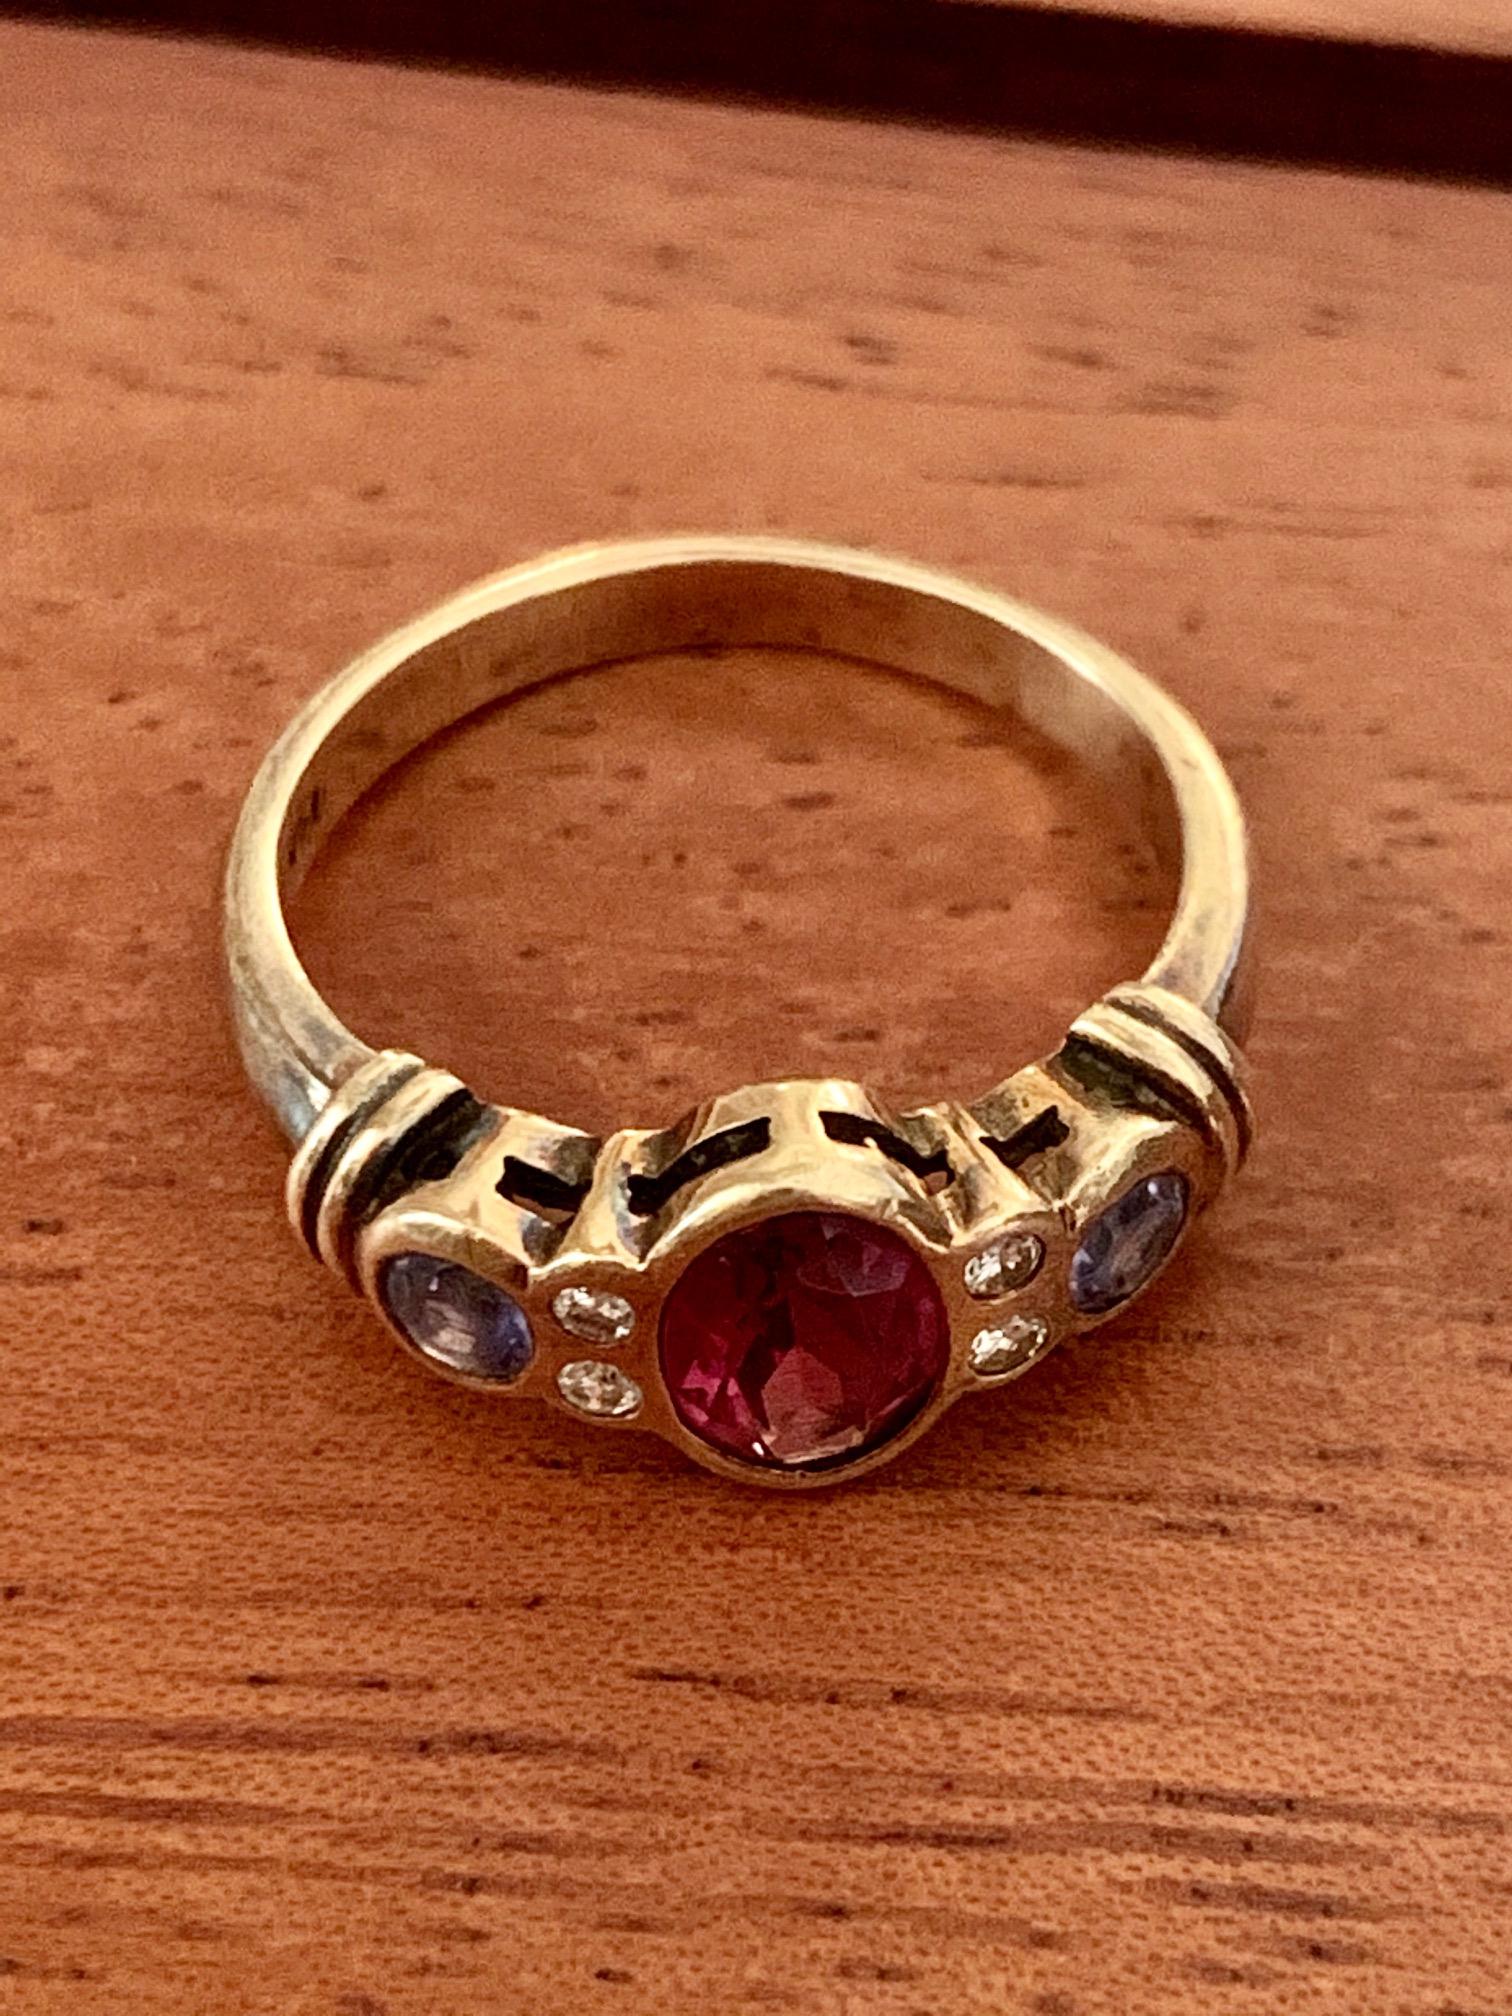 This modern ring features one 7 x 5mm oval Rhodolite Garnet center stone and two 3mm Tanzanite side stones, along with 4-1.5mm brilliant cut side Diamonds.

Size: 6 1/4
Weight:  3.7 grams